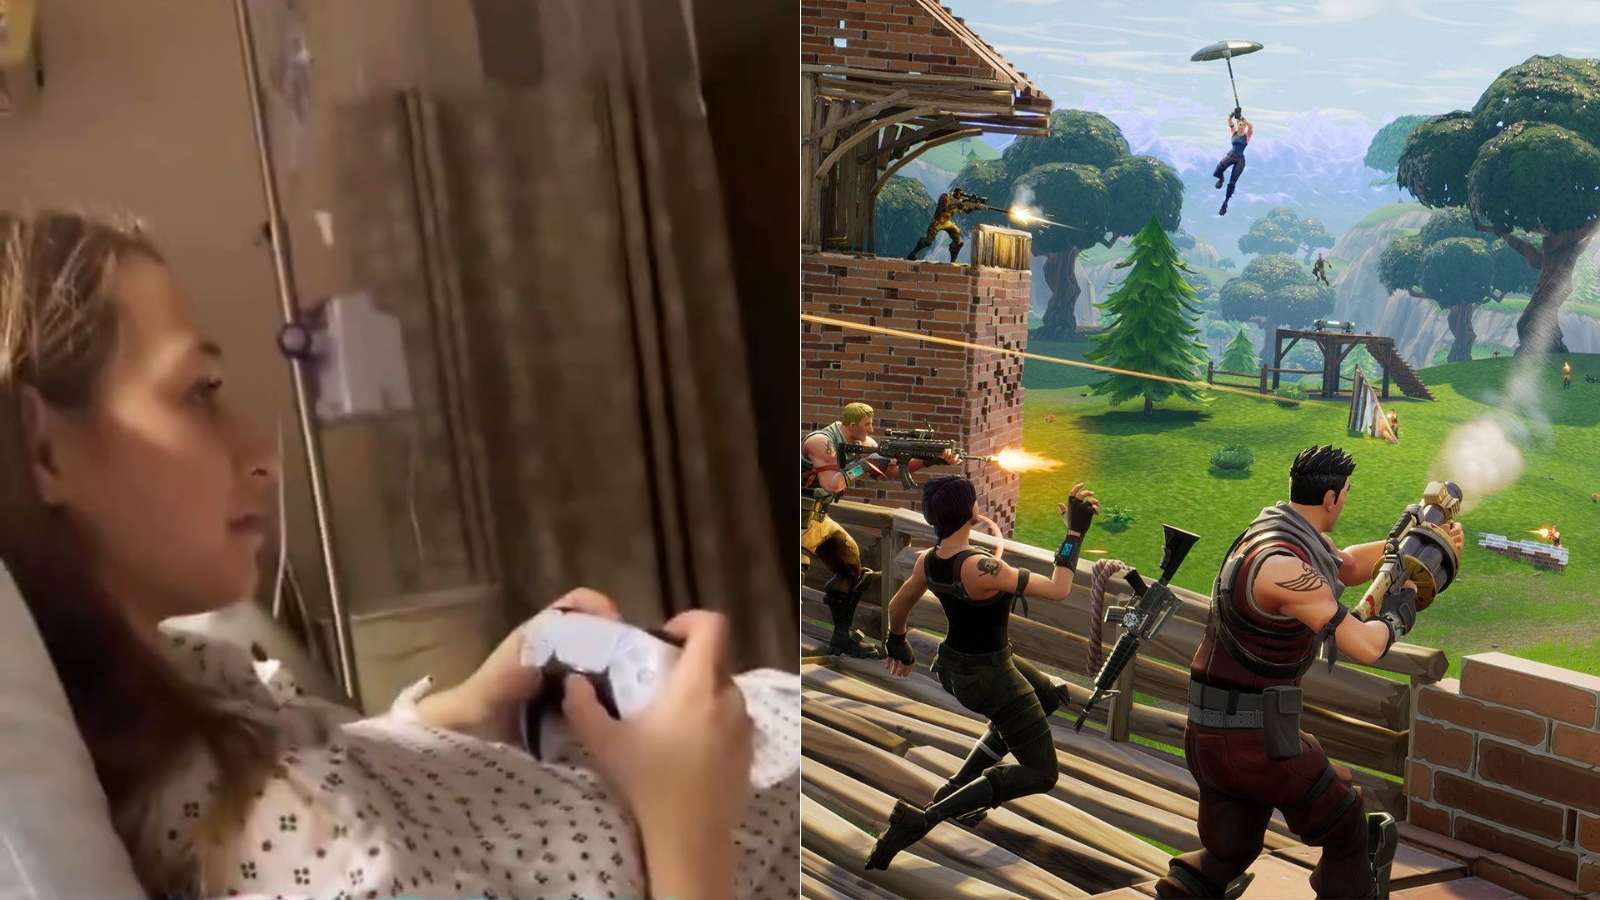 Mum playing Fortnite in a hospital